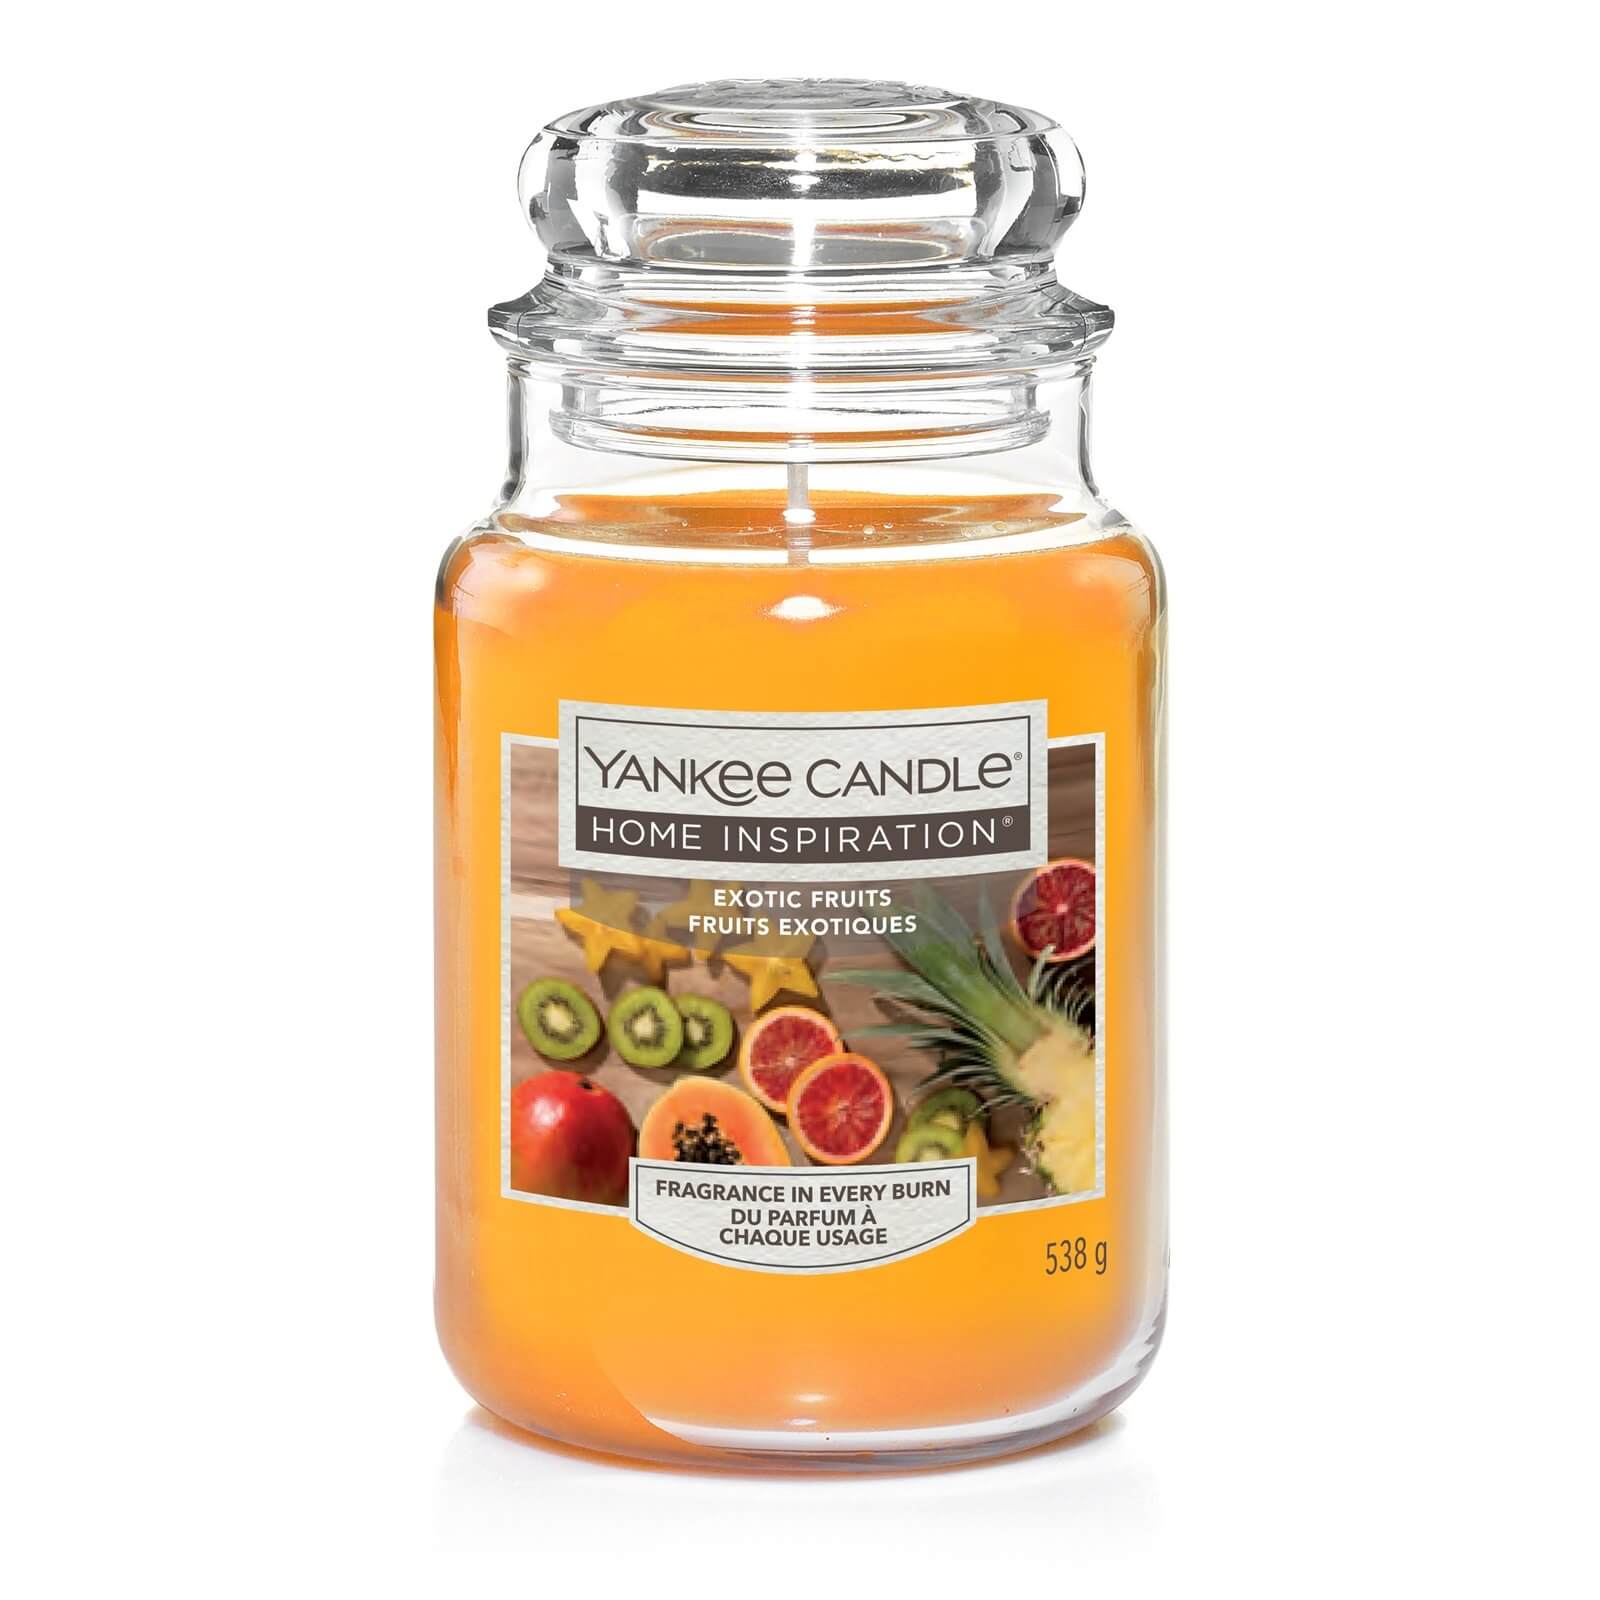 Yankee Candle Home Inspiration Scented Candle - Large Jar - Exotic Fruits